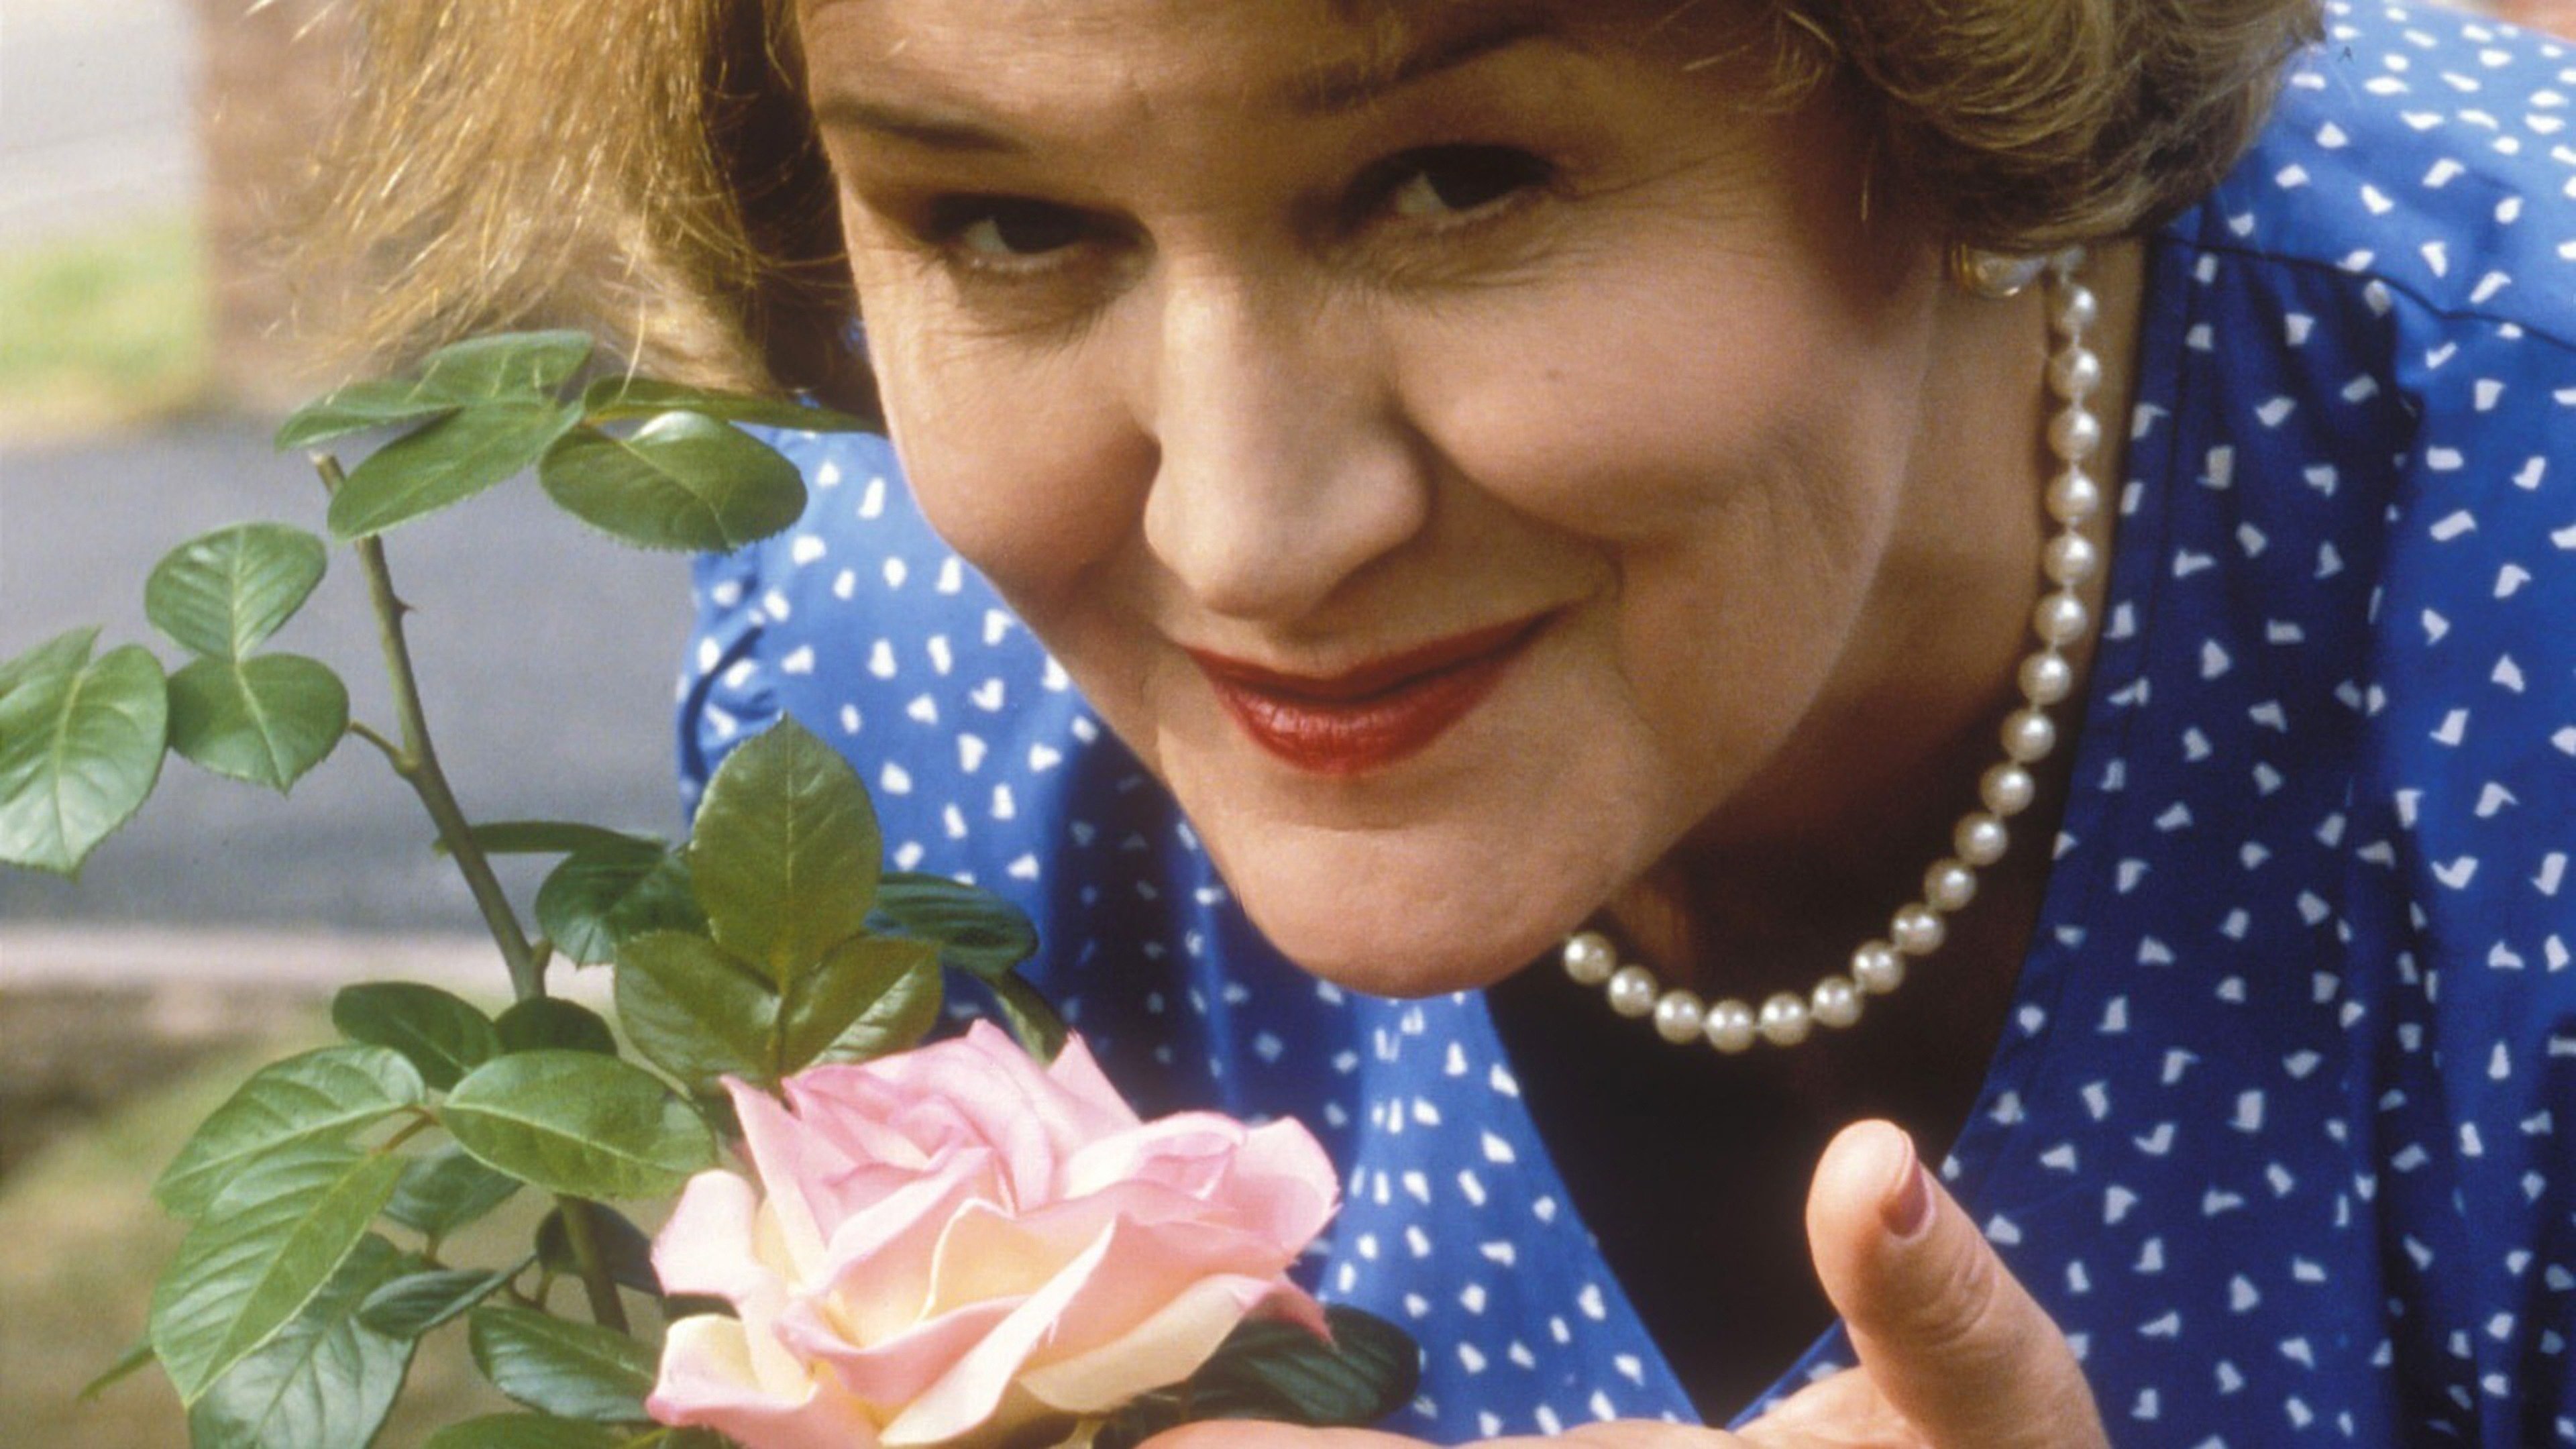 Hyacinth Bucket. Patricia Routledge.